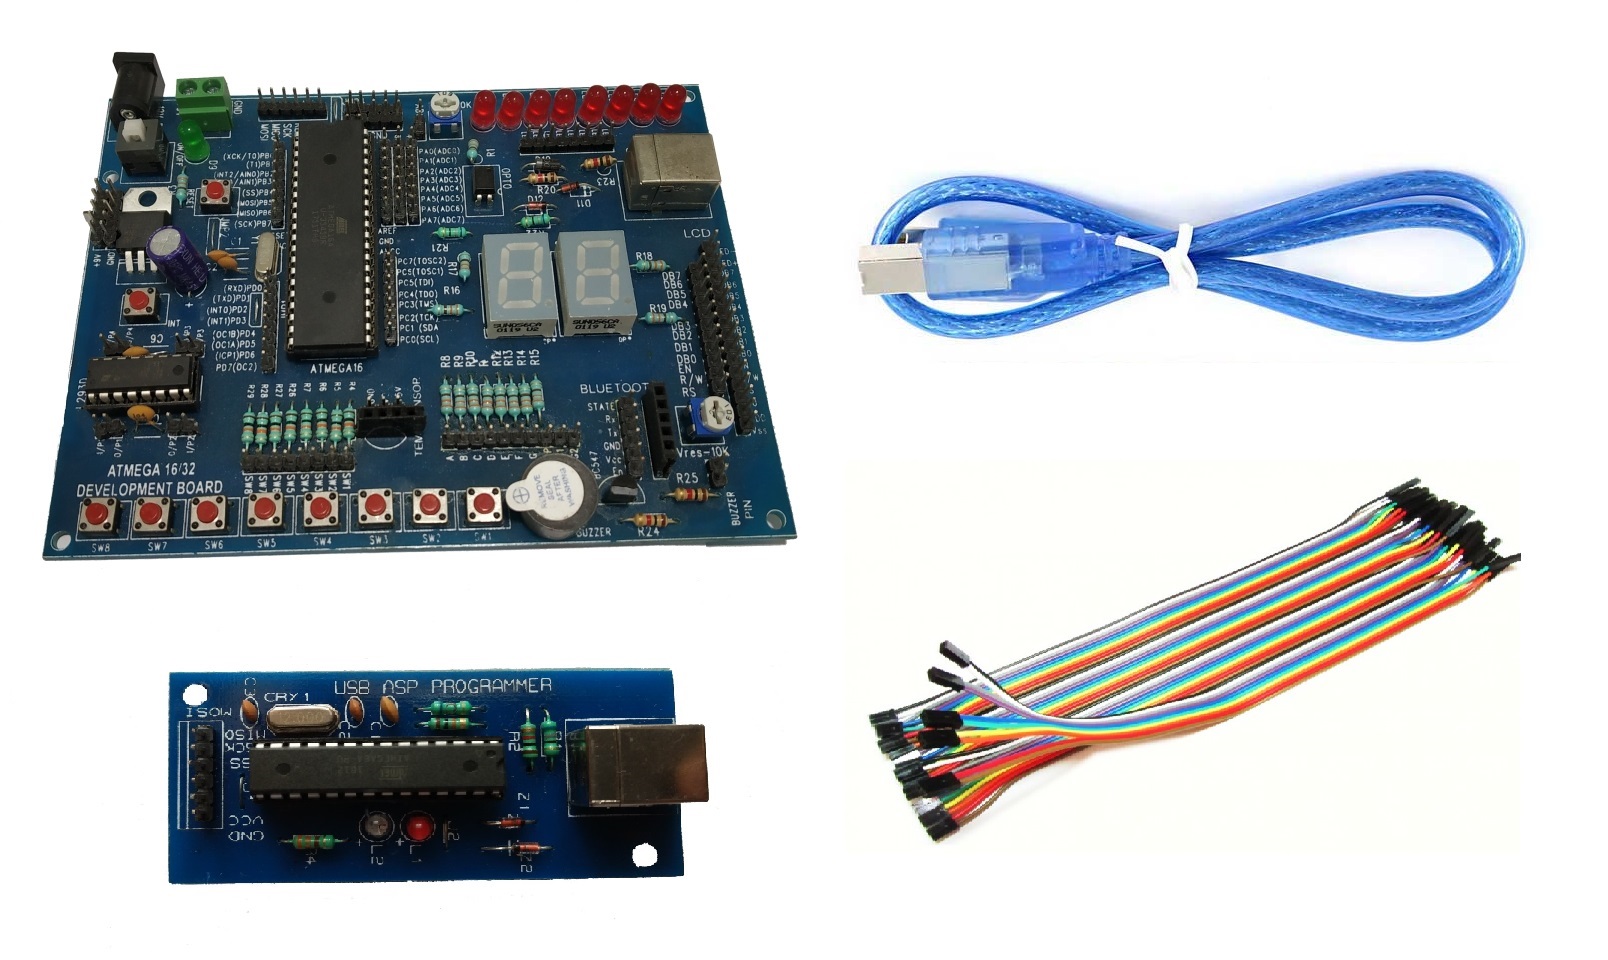 AVR Atmega16/32 Microcontroller Development Board With USB-ASP Programmer & 40-Pin Wires